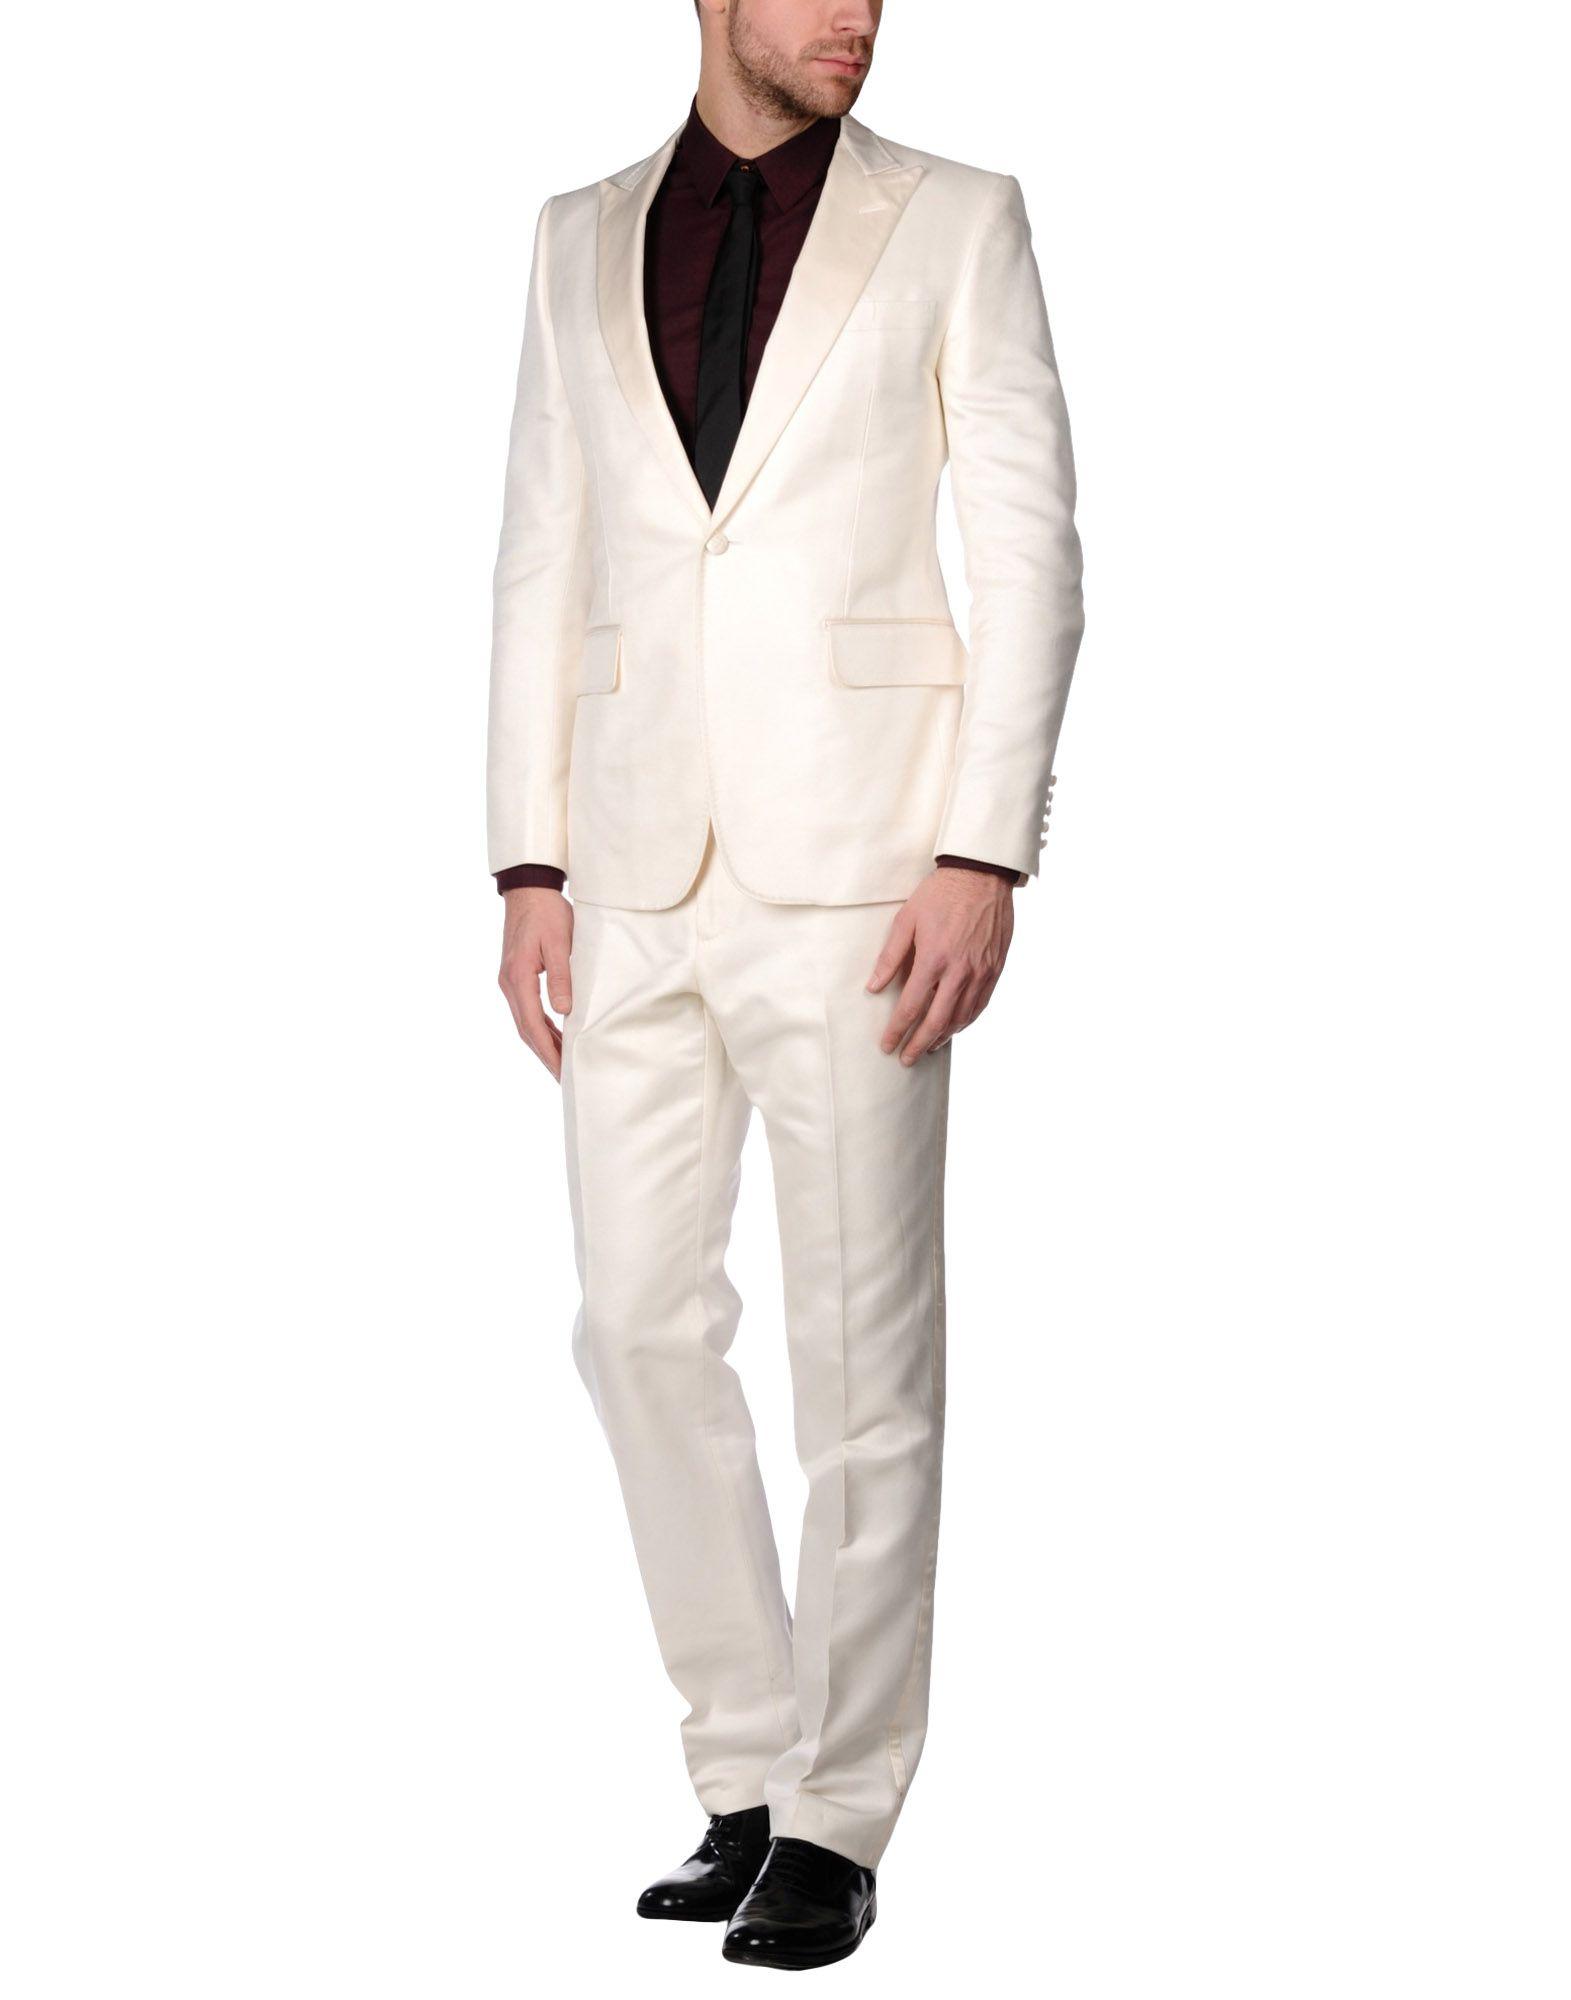 Gucci Cotton Suit in Ivory (White) for Men - Lyst